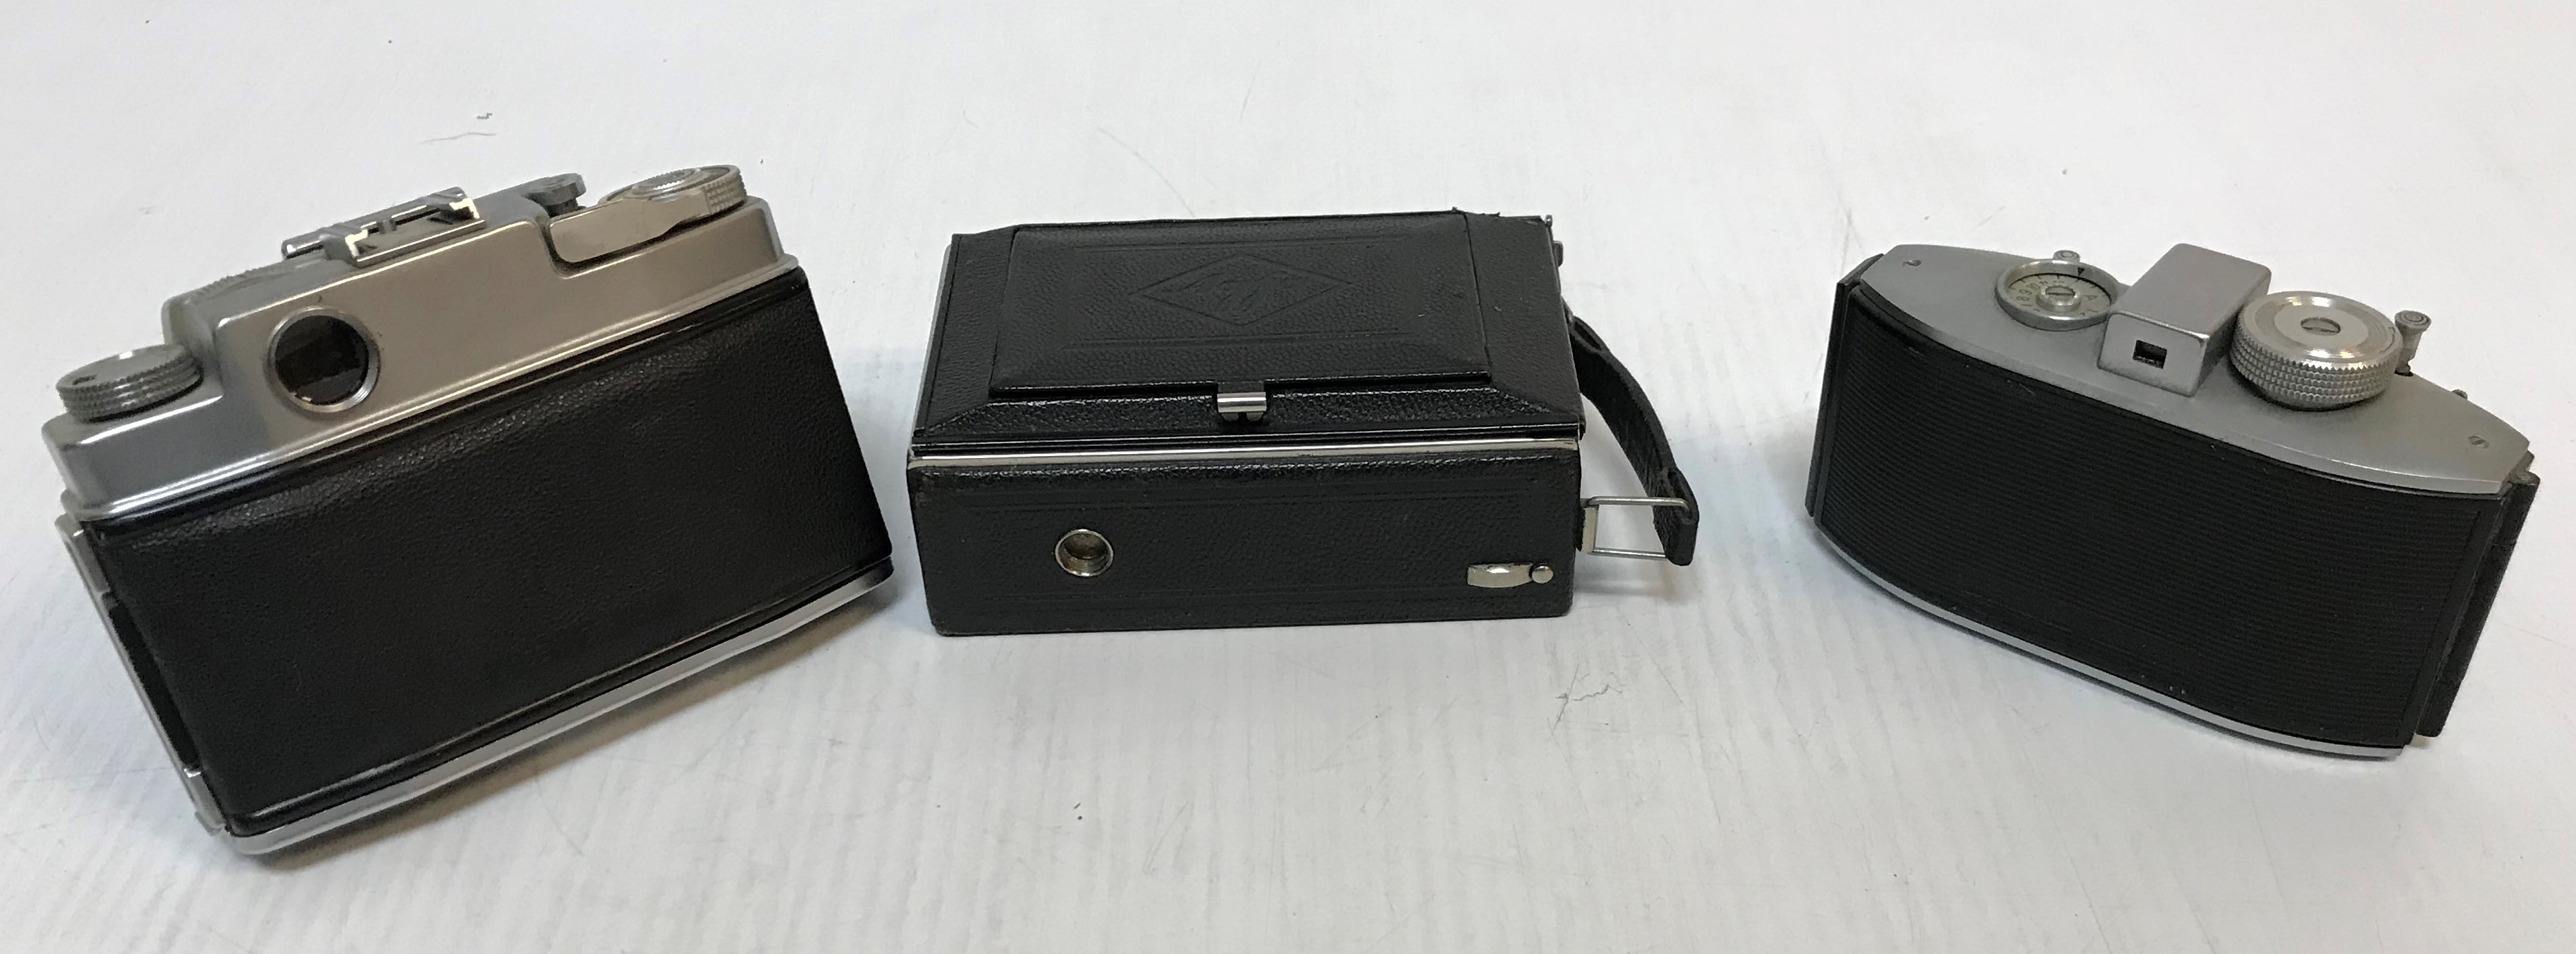 A collection of six various vintage Agfa cameras including an Ambi Silette, an Agfa Karat, - Image 6 of 6